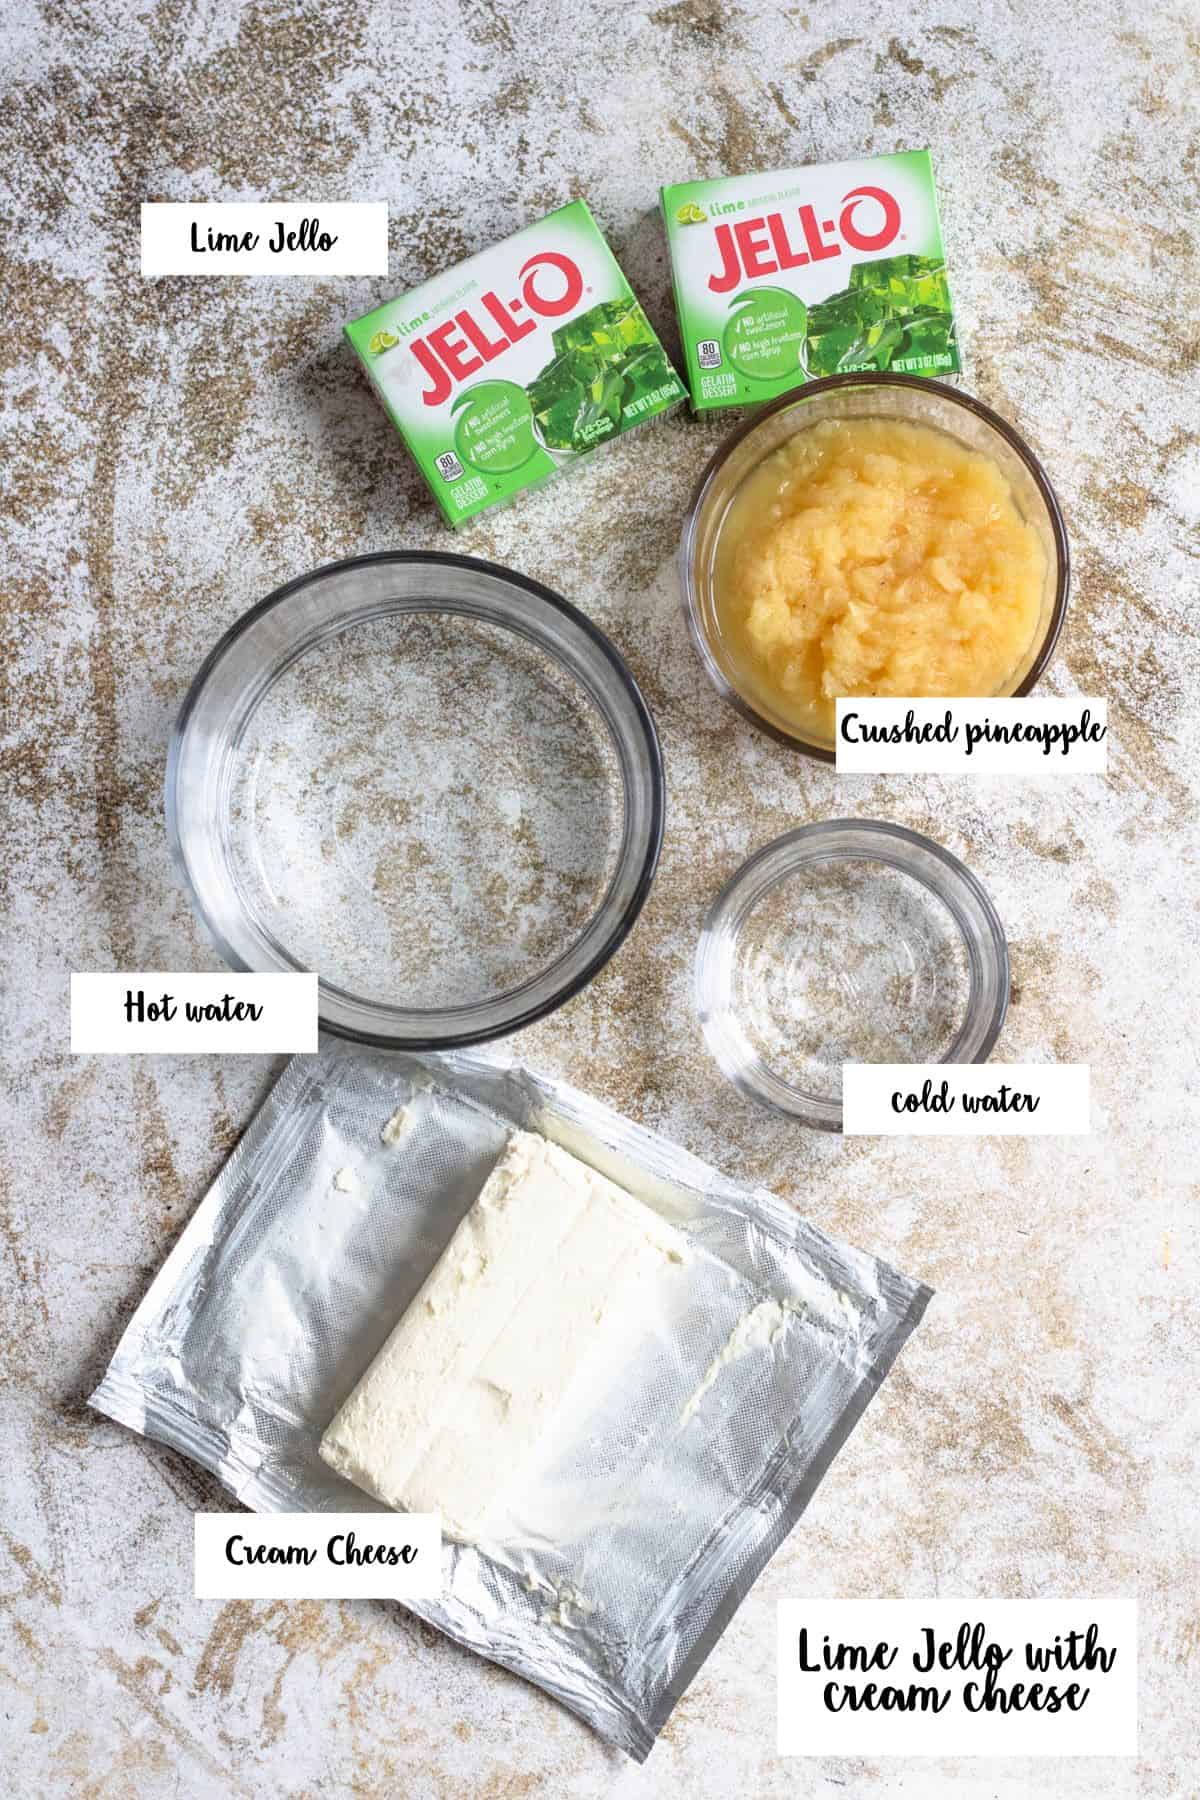 Ingredients shown are used for a lime jello salad. 